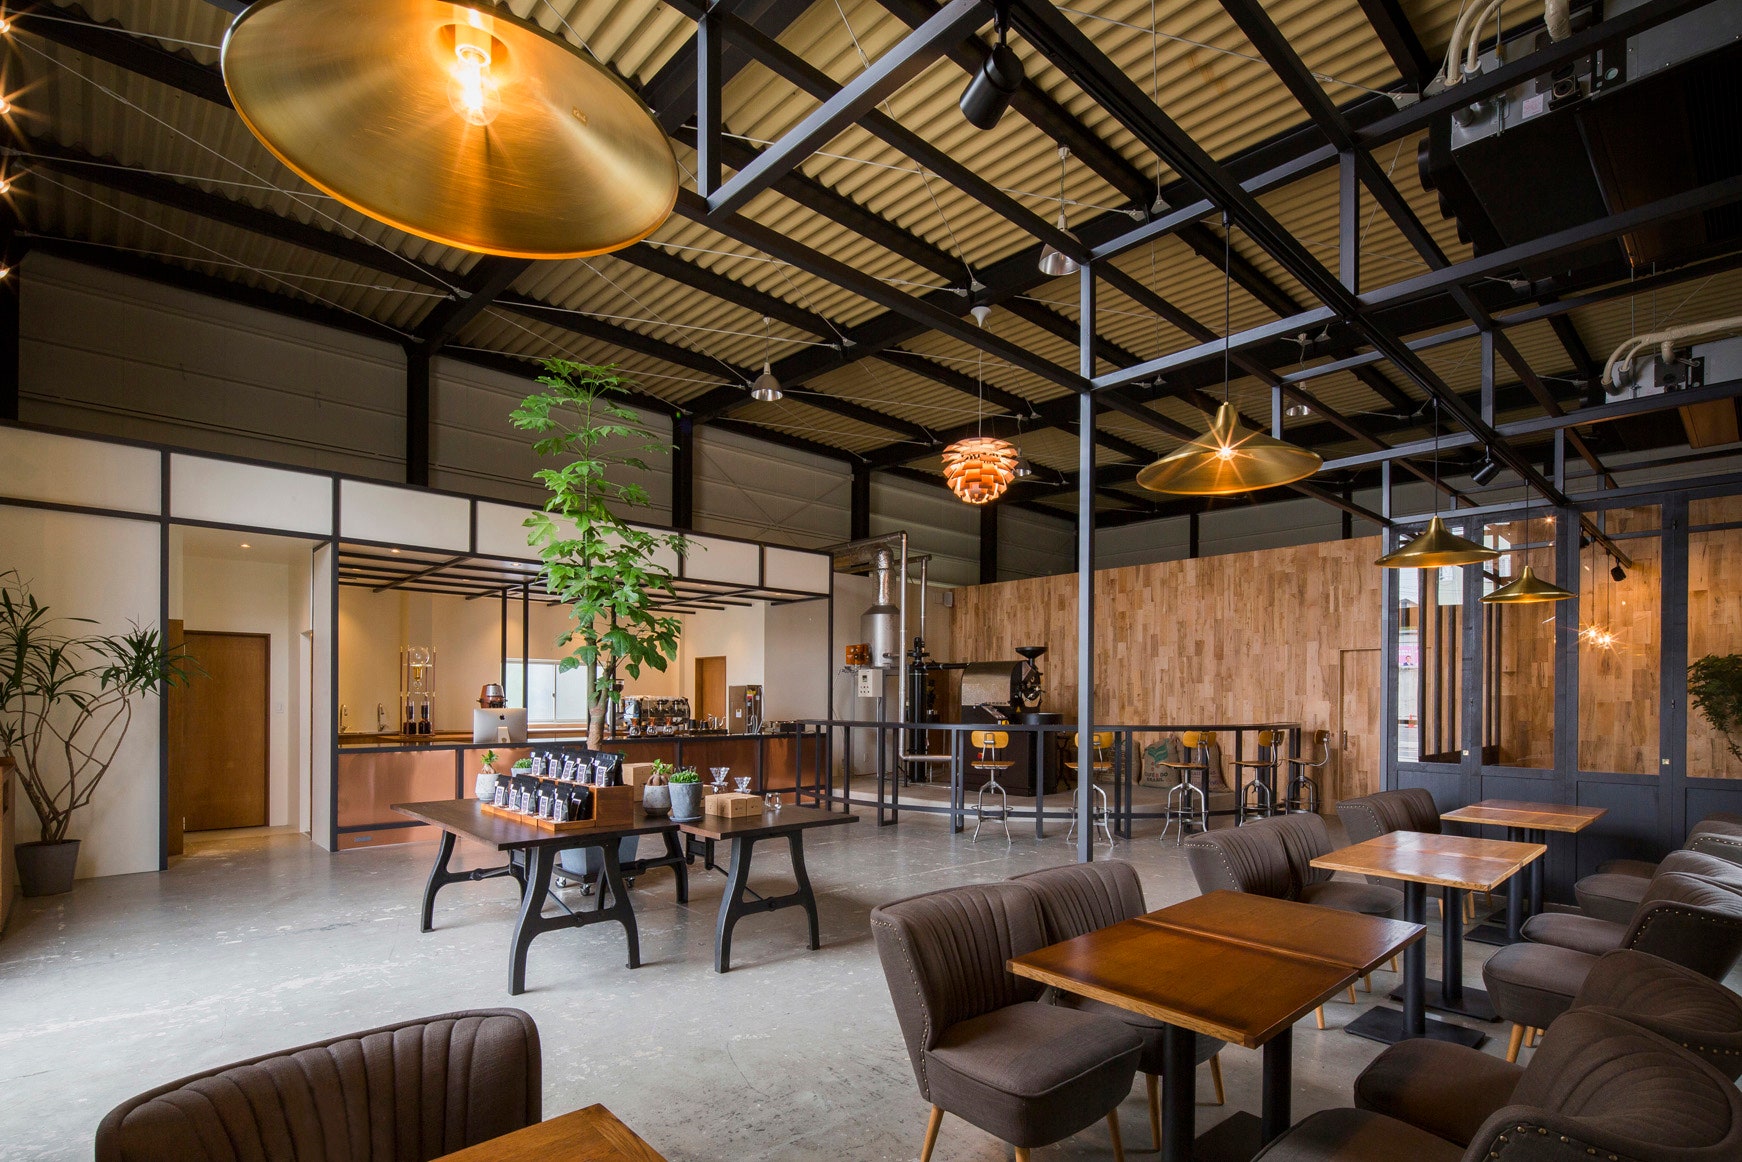 Architecture firm Iks Design transformed a warehouse into a warm and tranquil coffee shop in Japan. The firm outfitted the space using brass and copper accents, including the copper-clad coffee bar. The roaster is set on a platform and surrounded by bar seating, allowing patrons to watch the roasting process.<p>Sign up for our newsletter to get the latest in design, decorating, celebrity style, shopping, and more.</p><a href="https://www.architecturaldigest.com/newsletter/subscribe?sourceCode=msnsend">Sign Up Now</a>